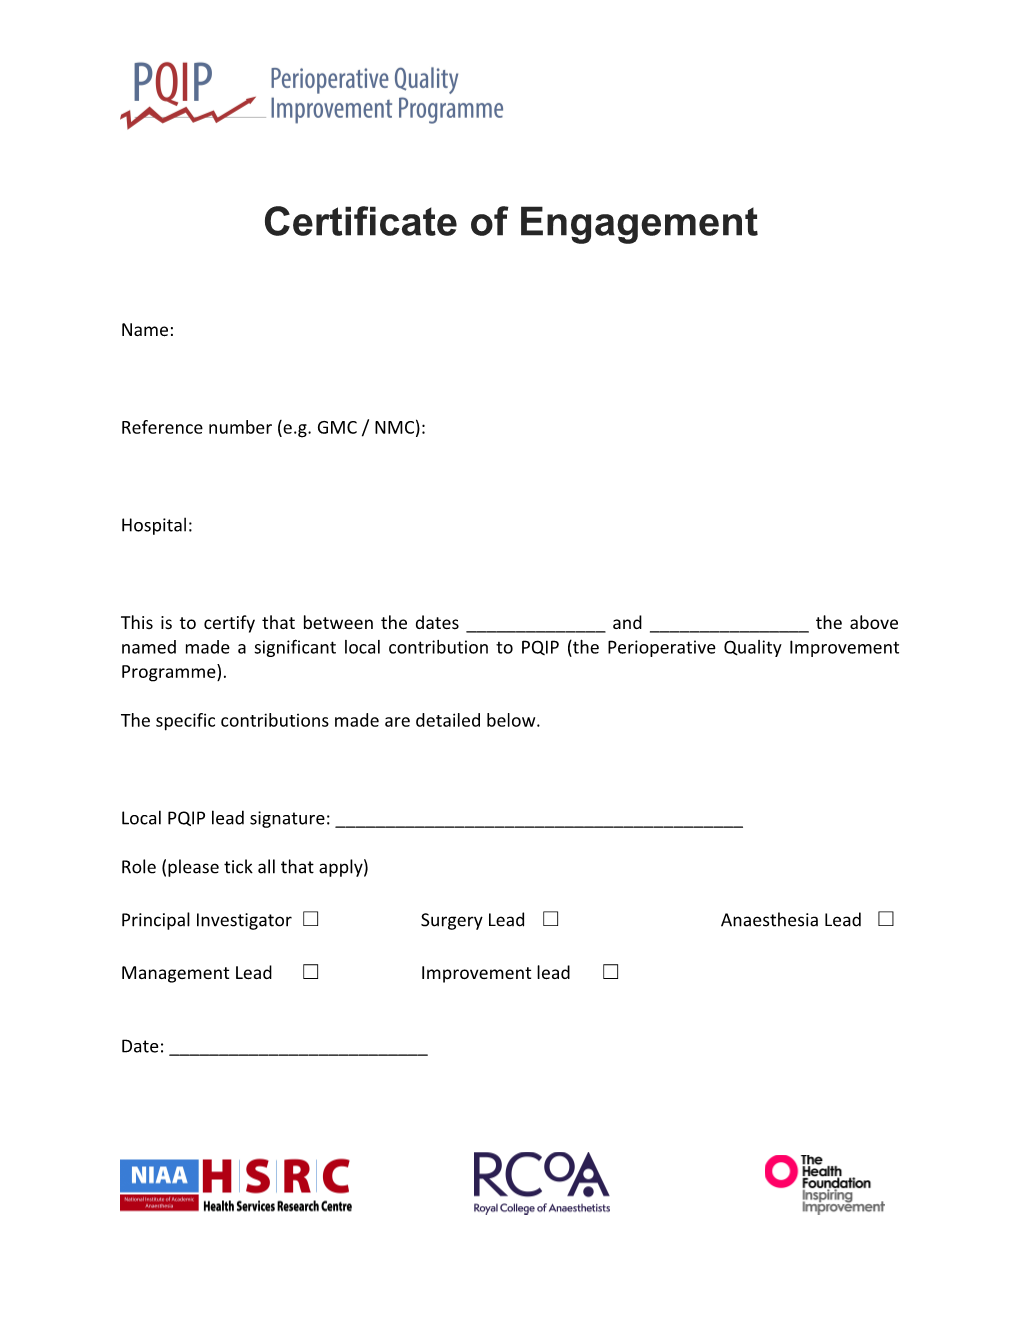 Certificate of Engagement